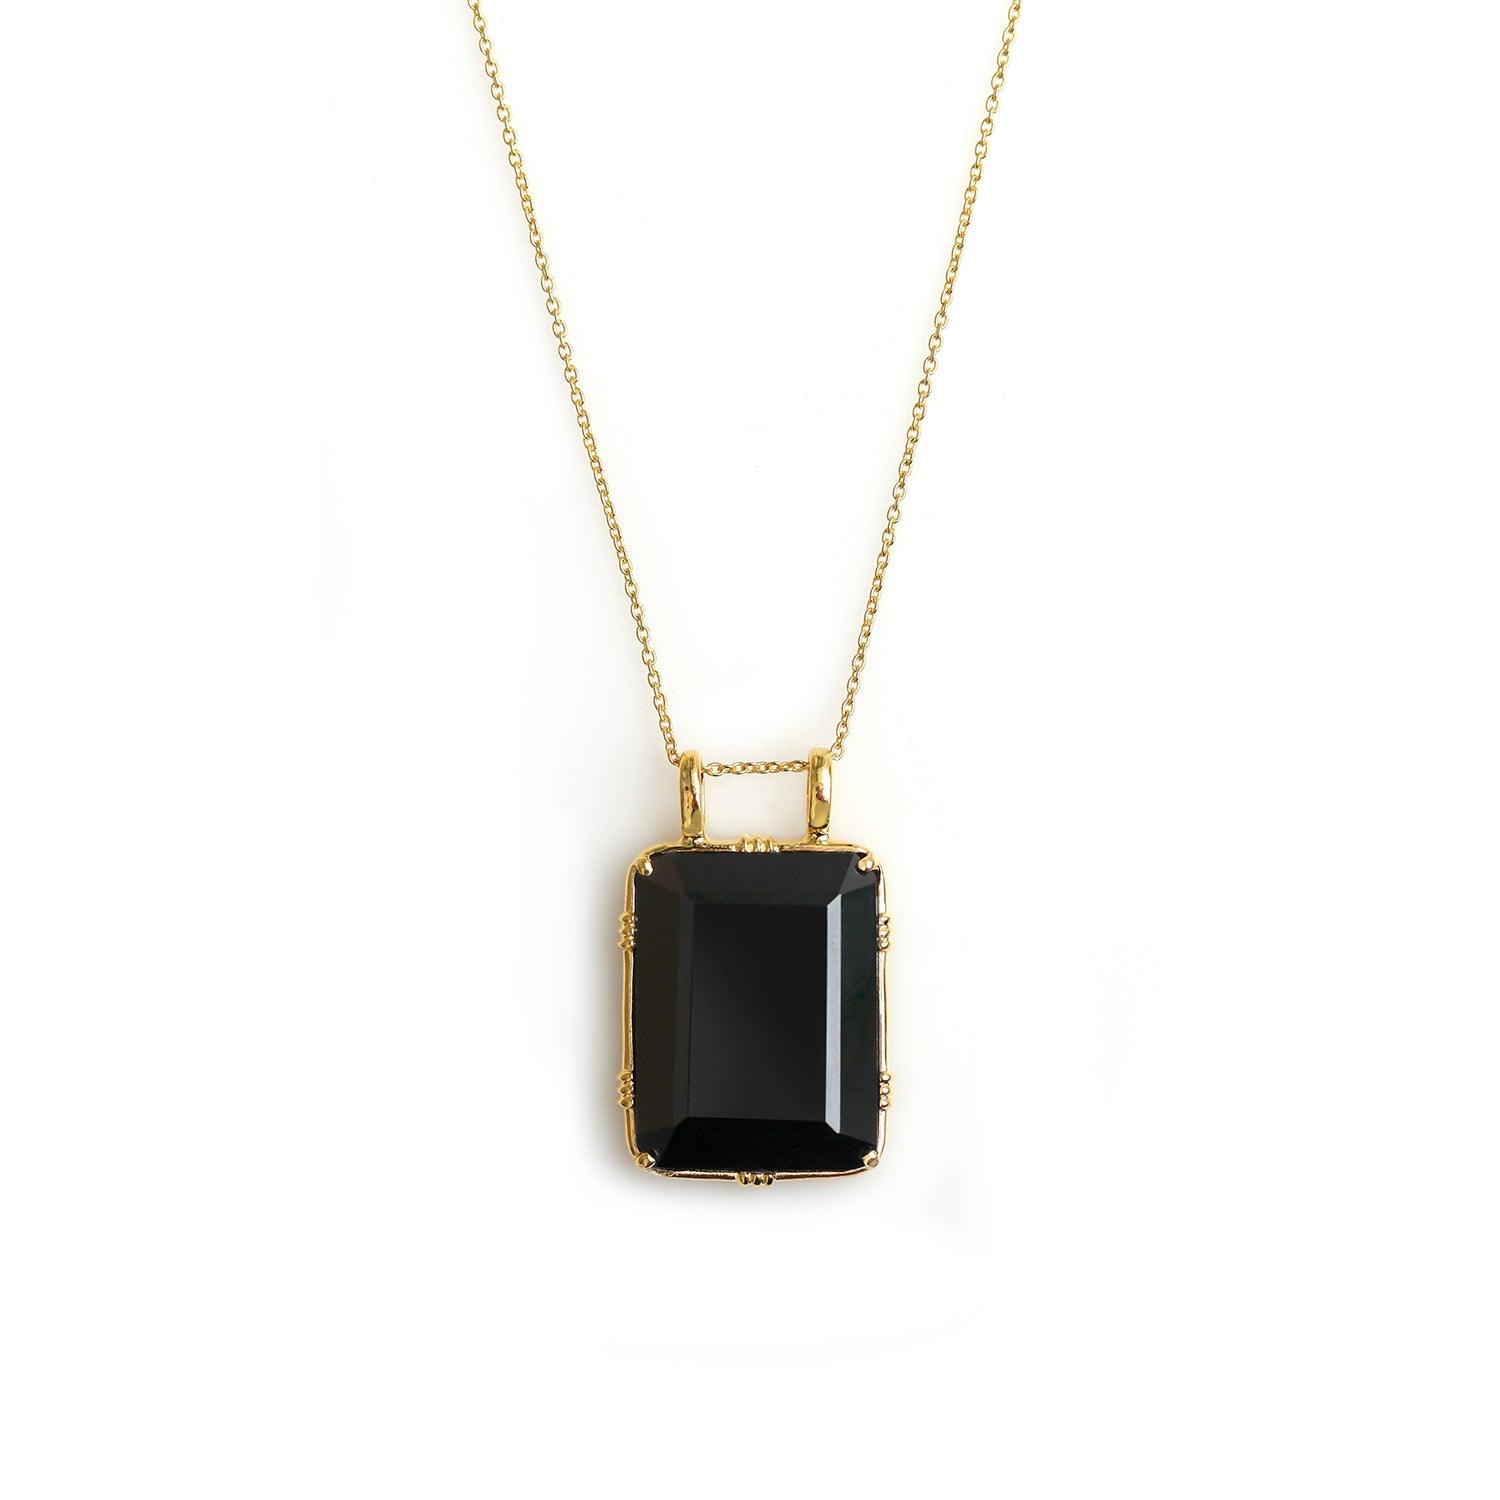 Black Onyx Necklace 14kt Gold Over Silver Chain Pendant Necklace Jewelry - YoTreasure